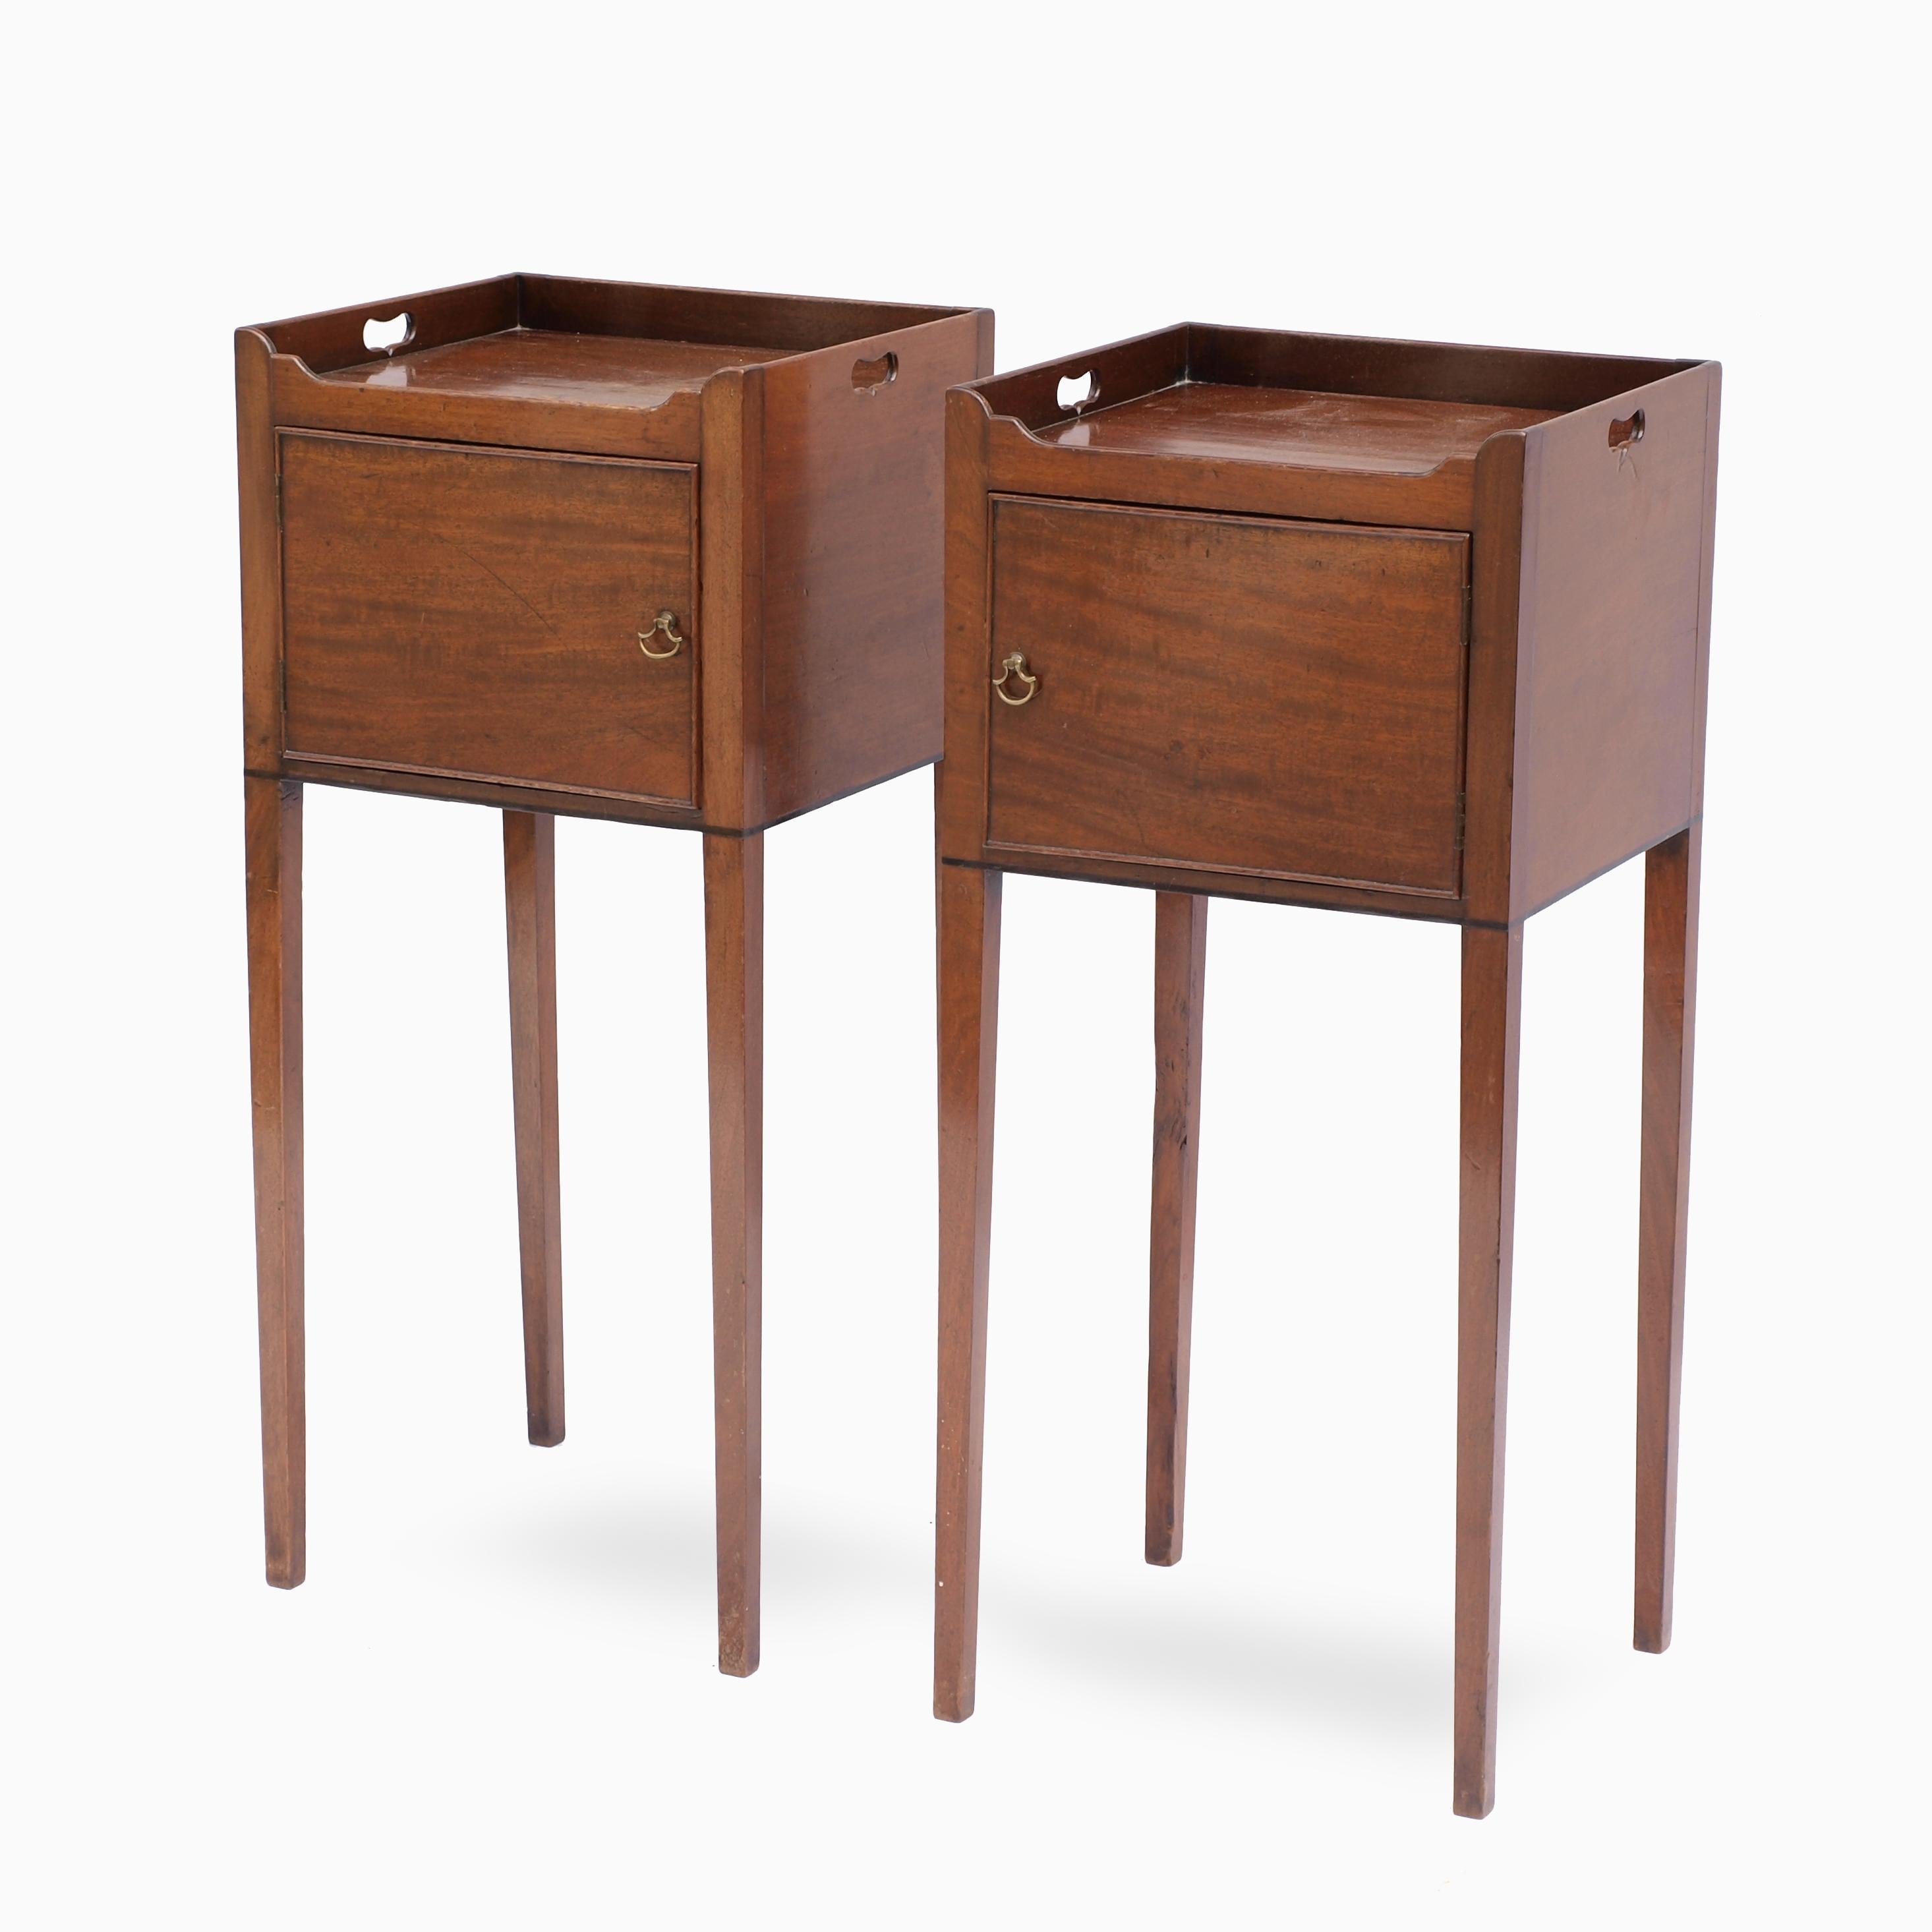 Georgian Fine Pair of Chippendale Period Mahogany Bedside Cabinets